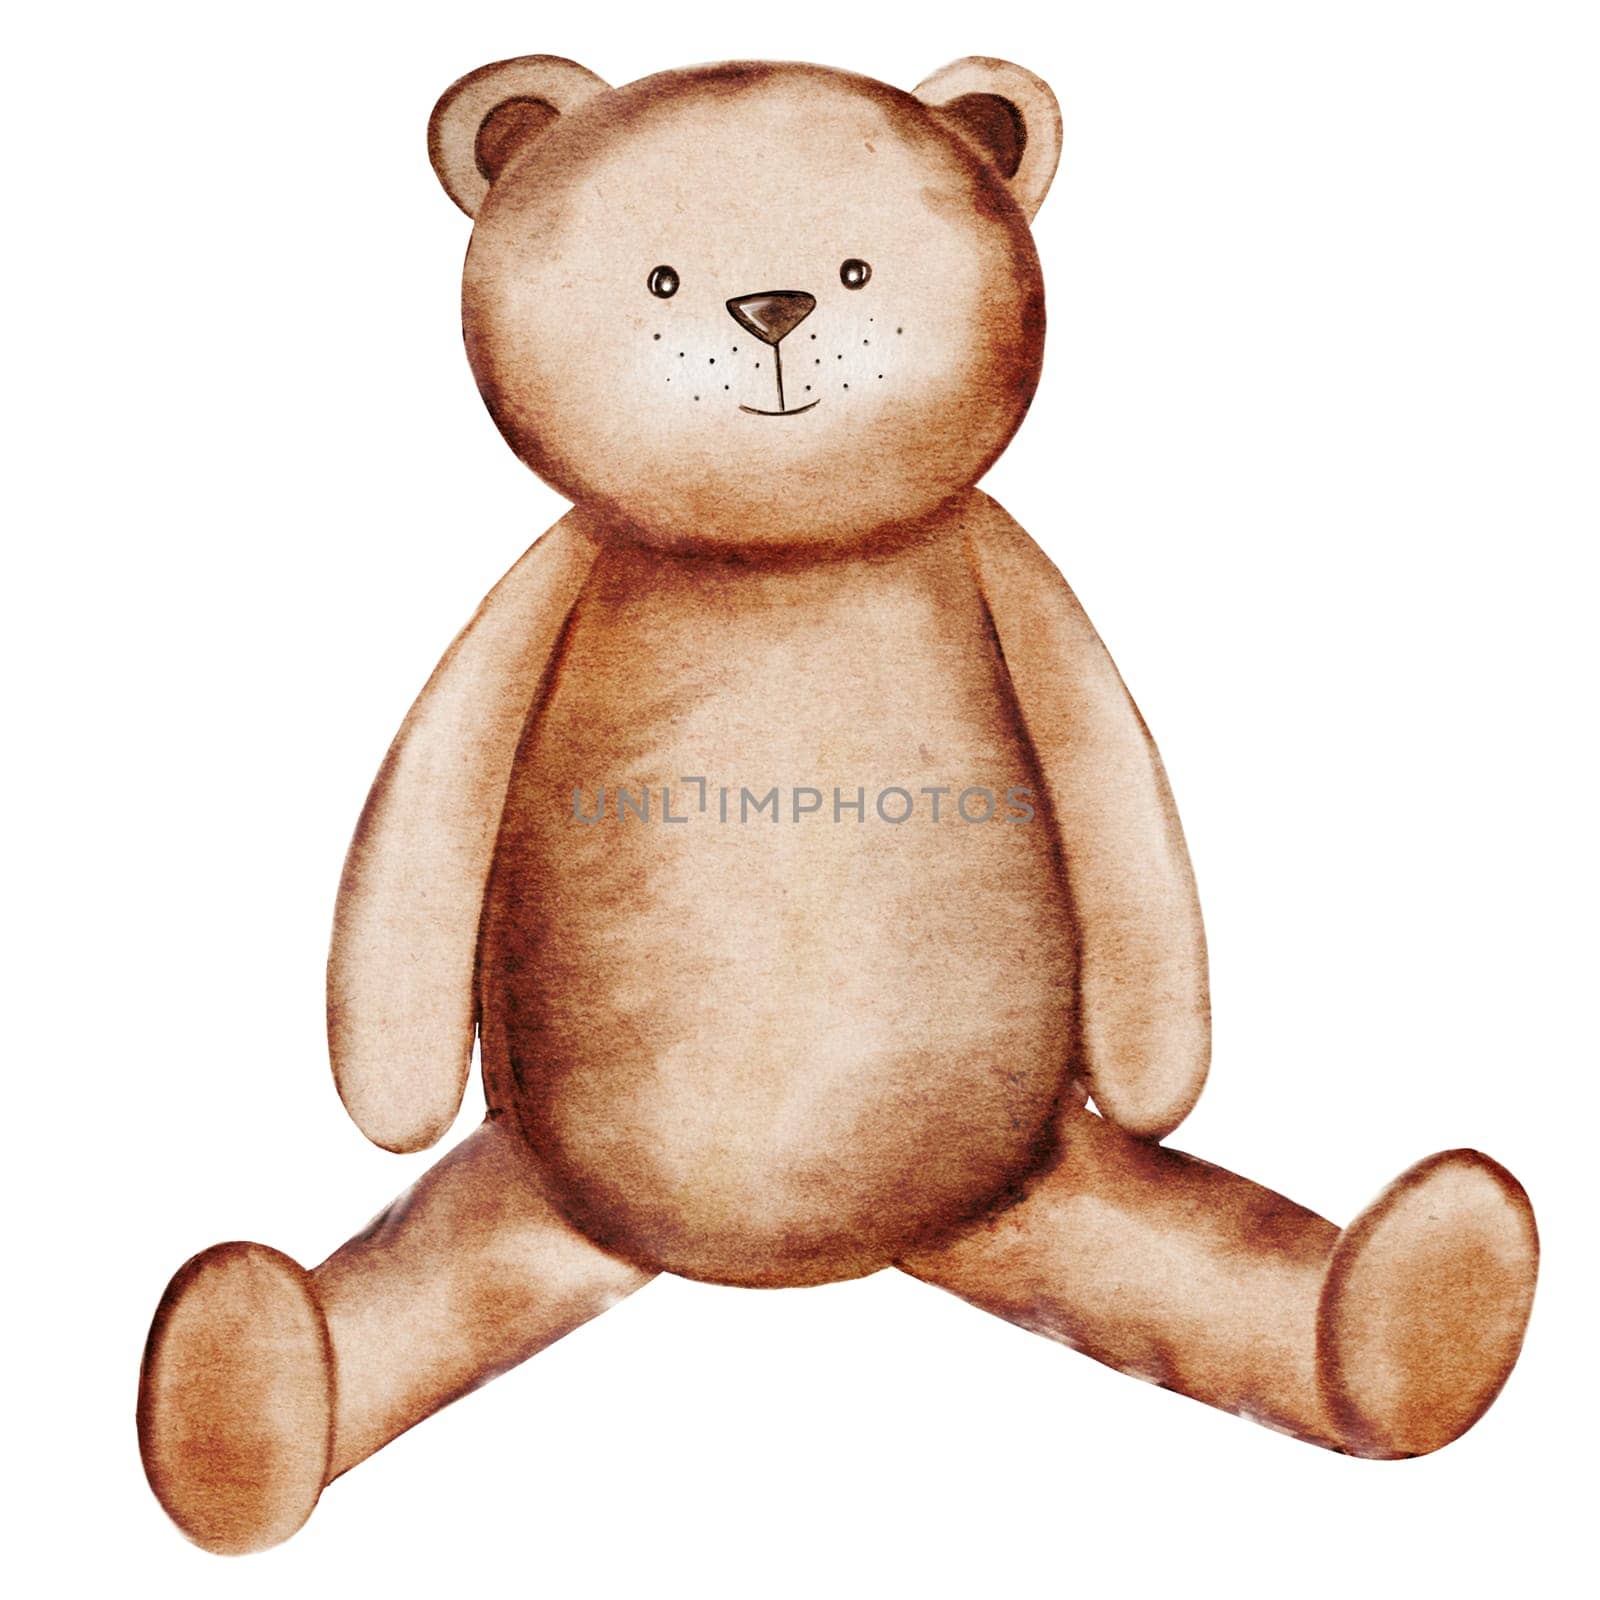 Cute cartoon teddy bear. Watercolor illustration of a plush toy on an isolated white background. Adorable hand drawing for children's design. Ideal for birthday cards and baby showers. High quality illustration